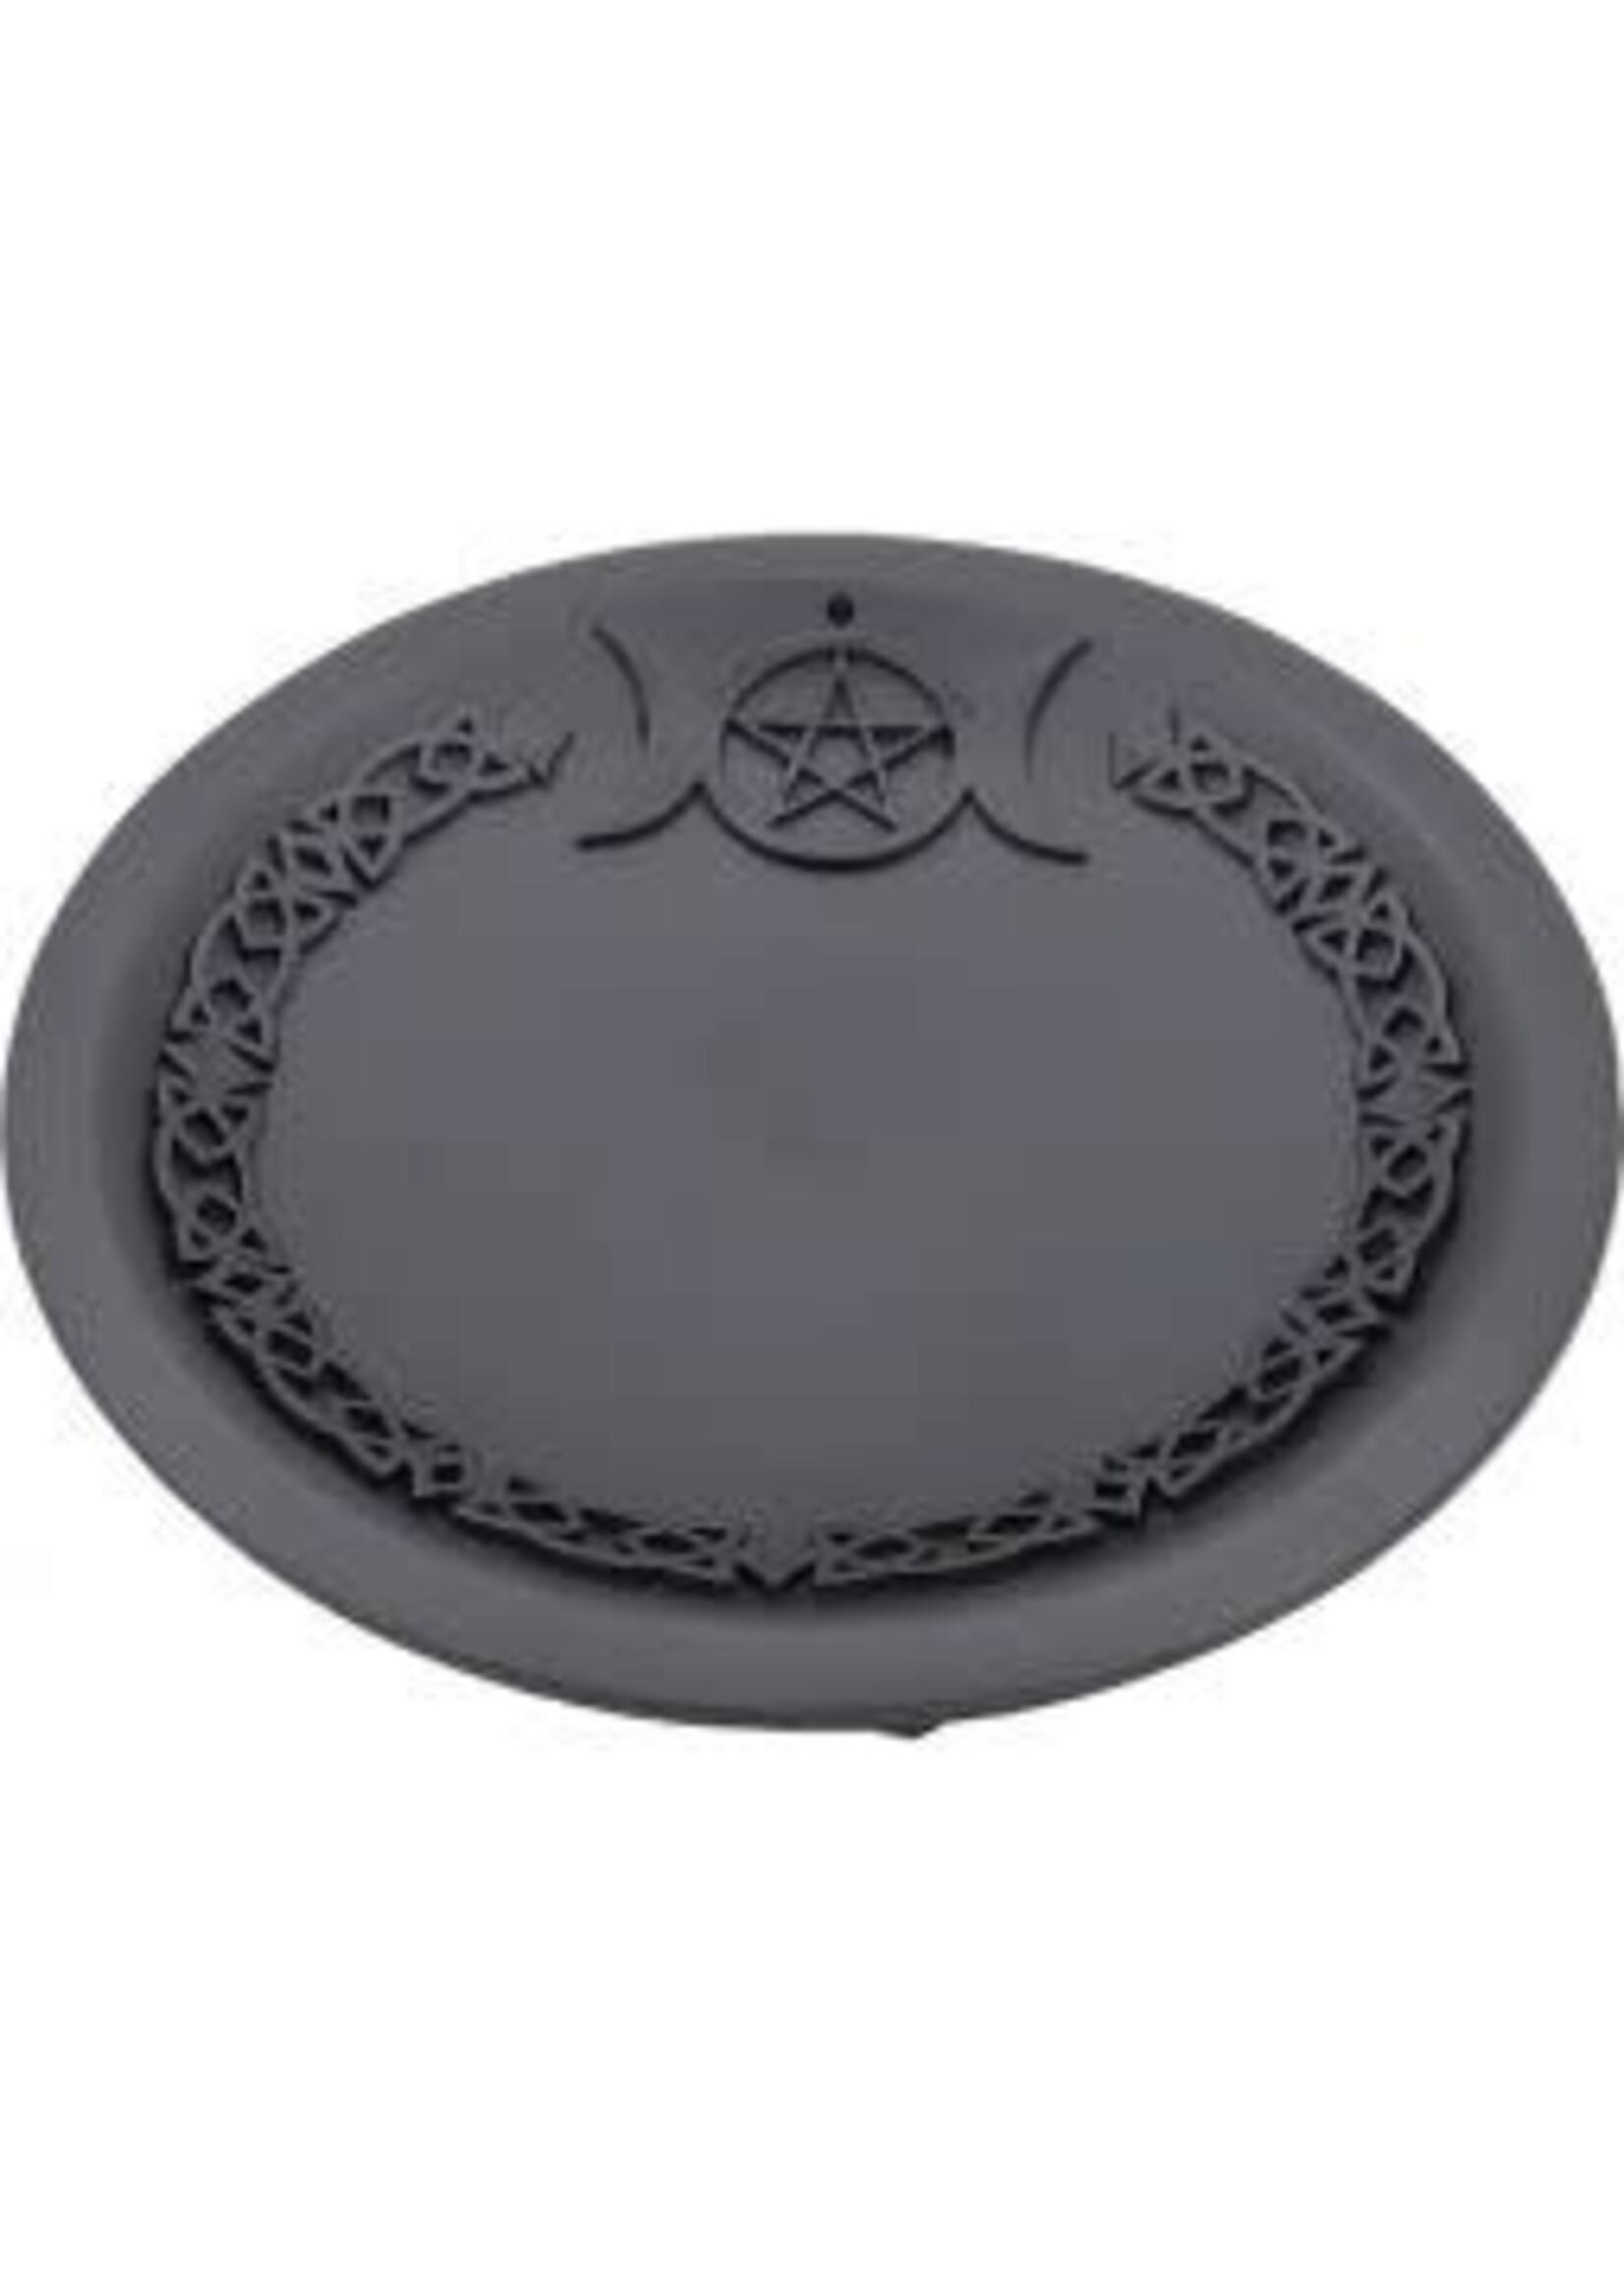 Cast Iron Offering Plate Incense Holder - Triple Moon w/ Pentacle